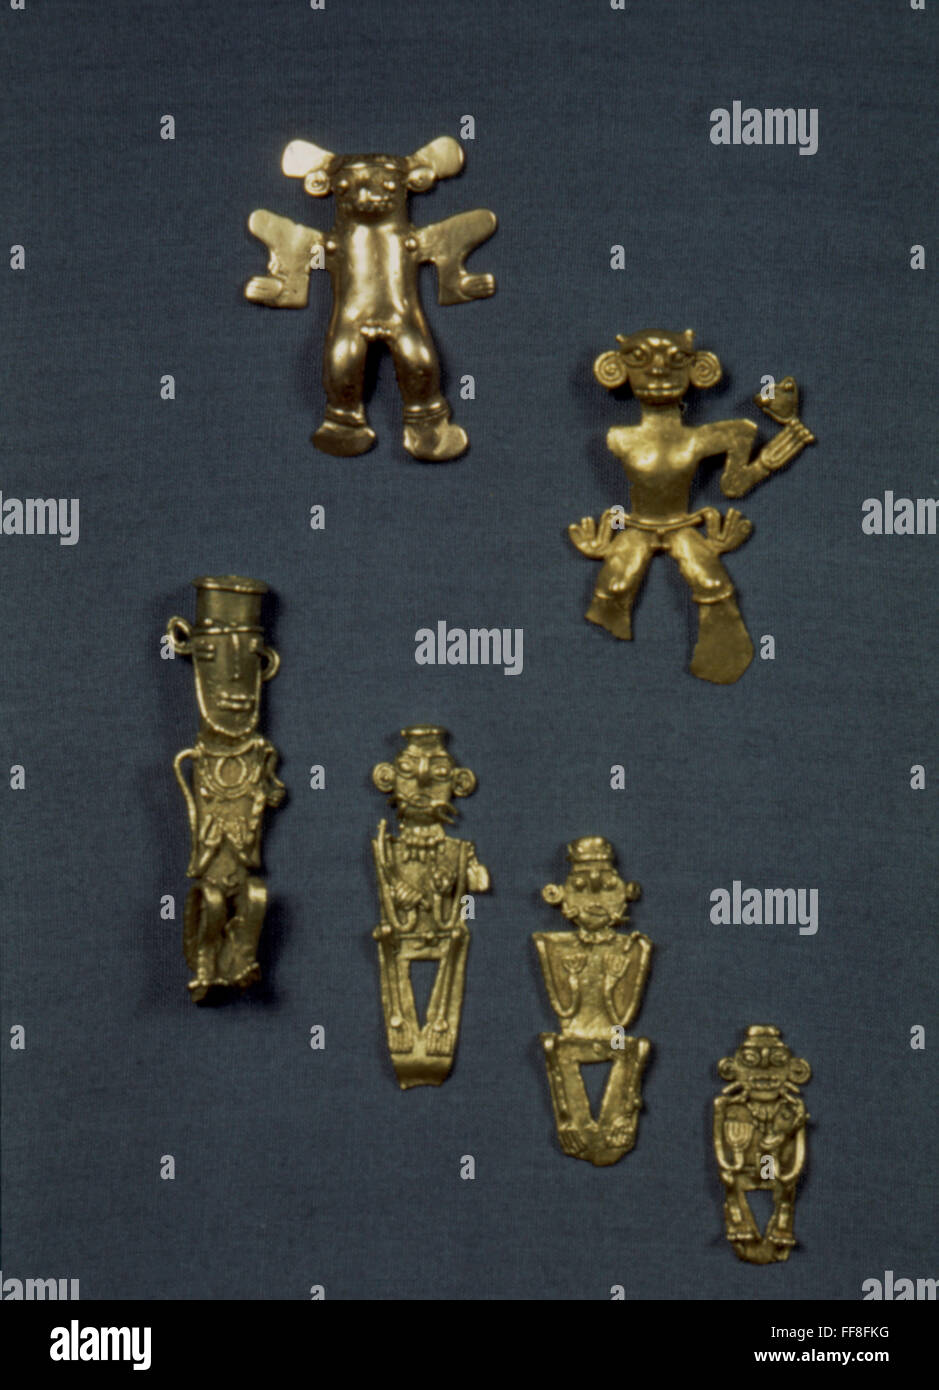 PRE-COLUMBIAN ART. /nGold bird ornaments from Bhibcha, Columbia; human ornaments from Costa Rica. Stock Photo